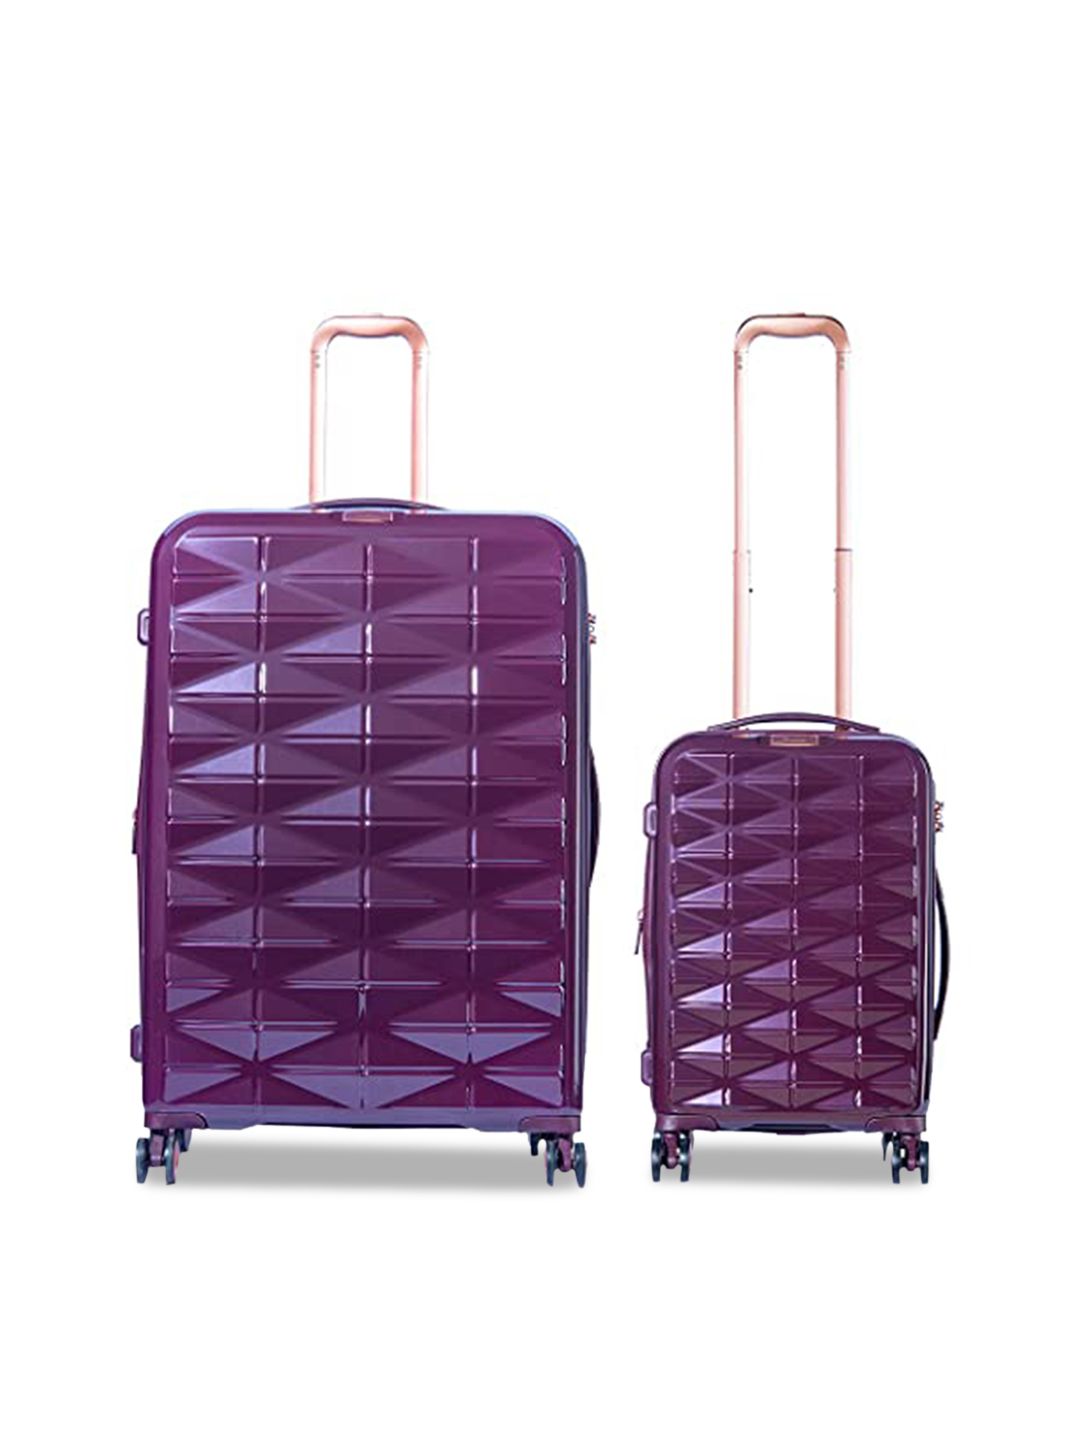 IT luggage Set Of 2 Purple Textured Hard-Sided Trolley Bag Price in India